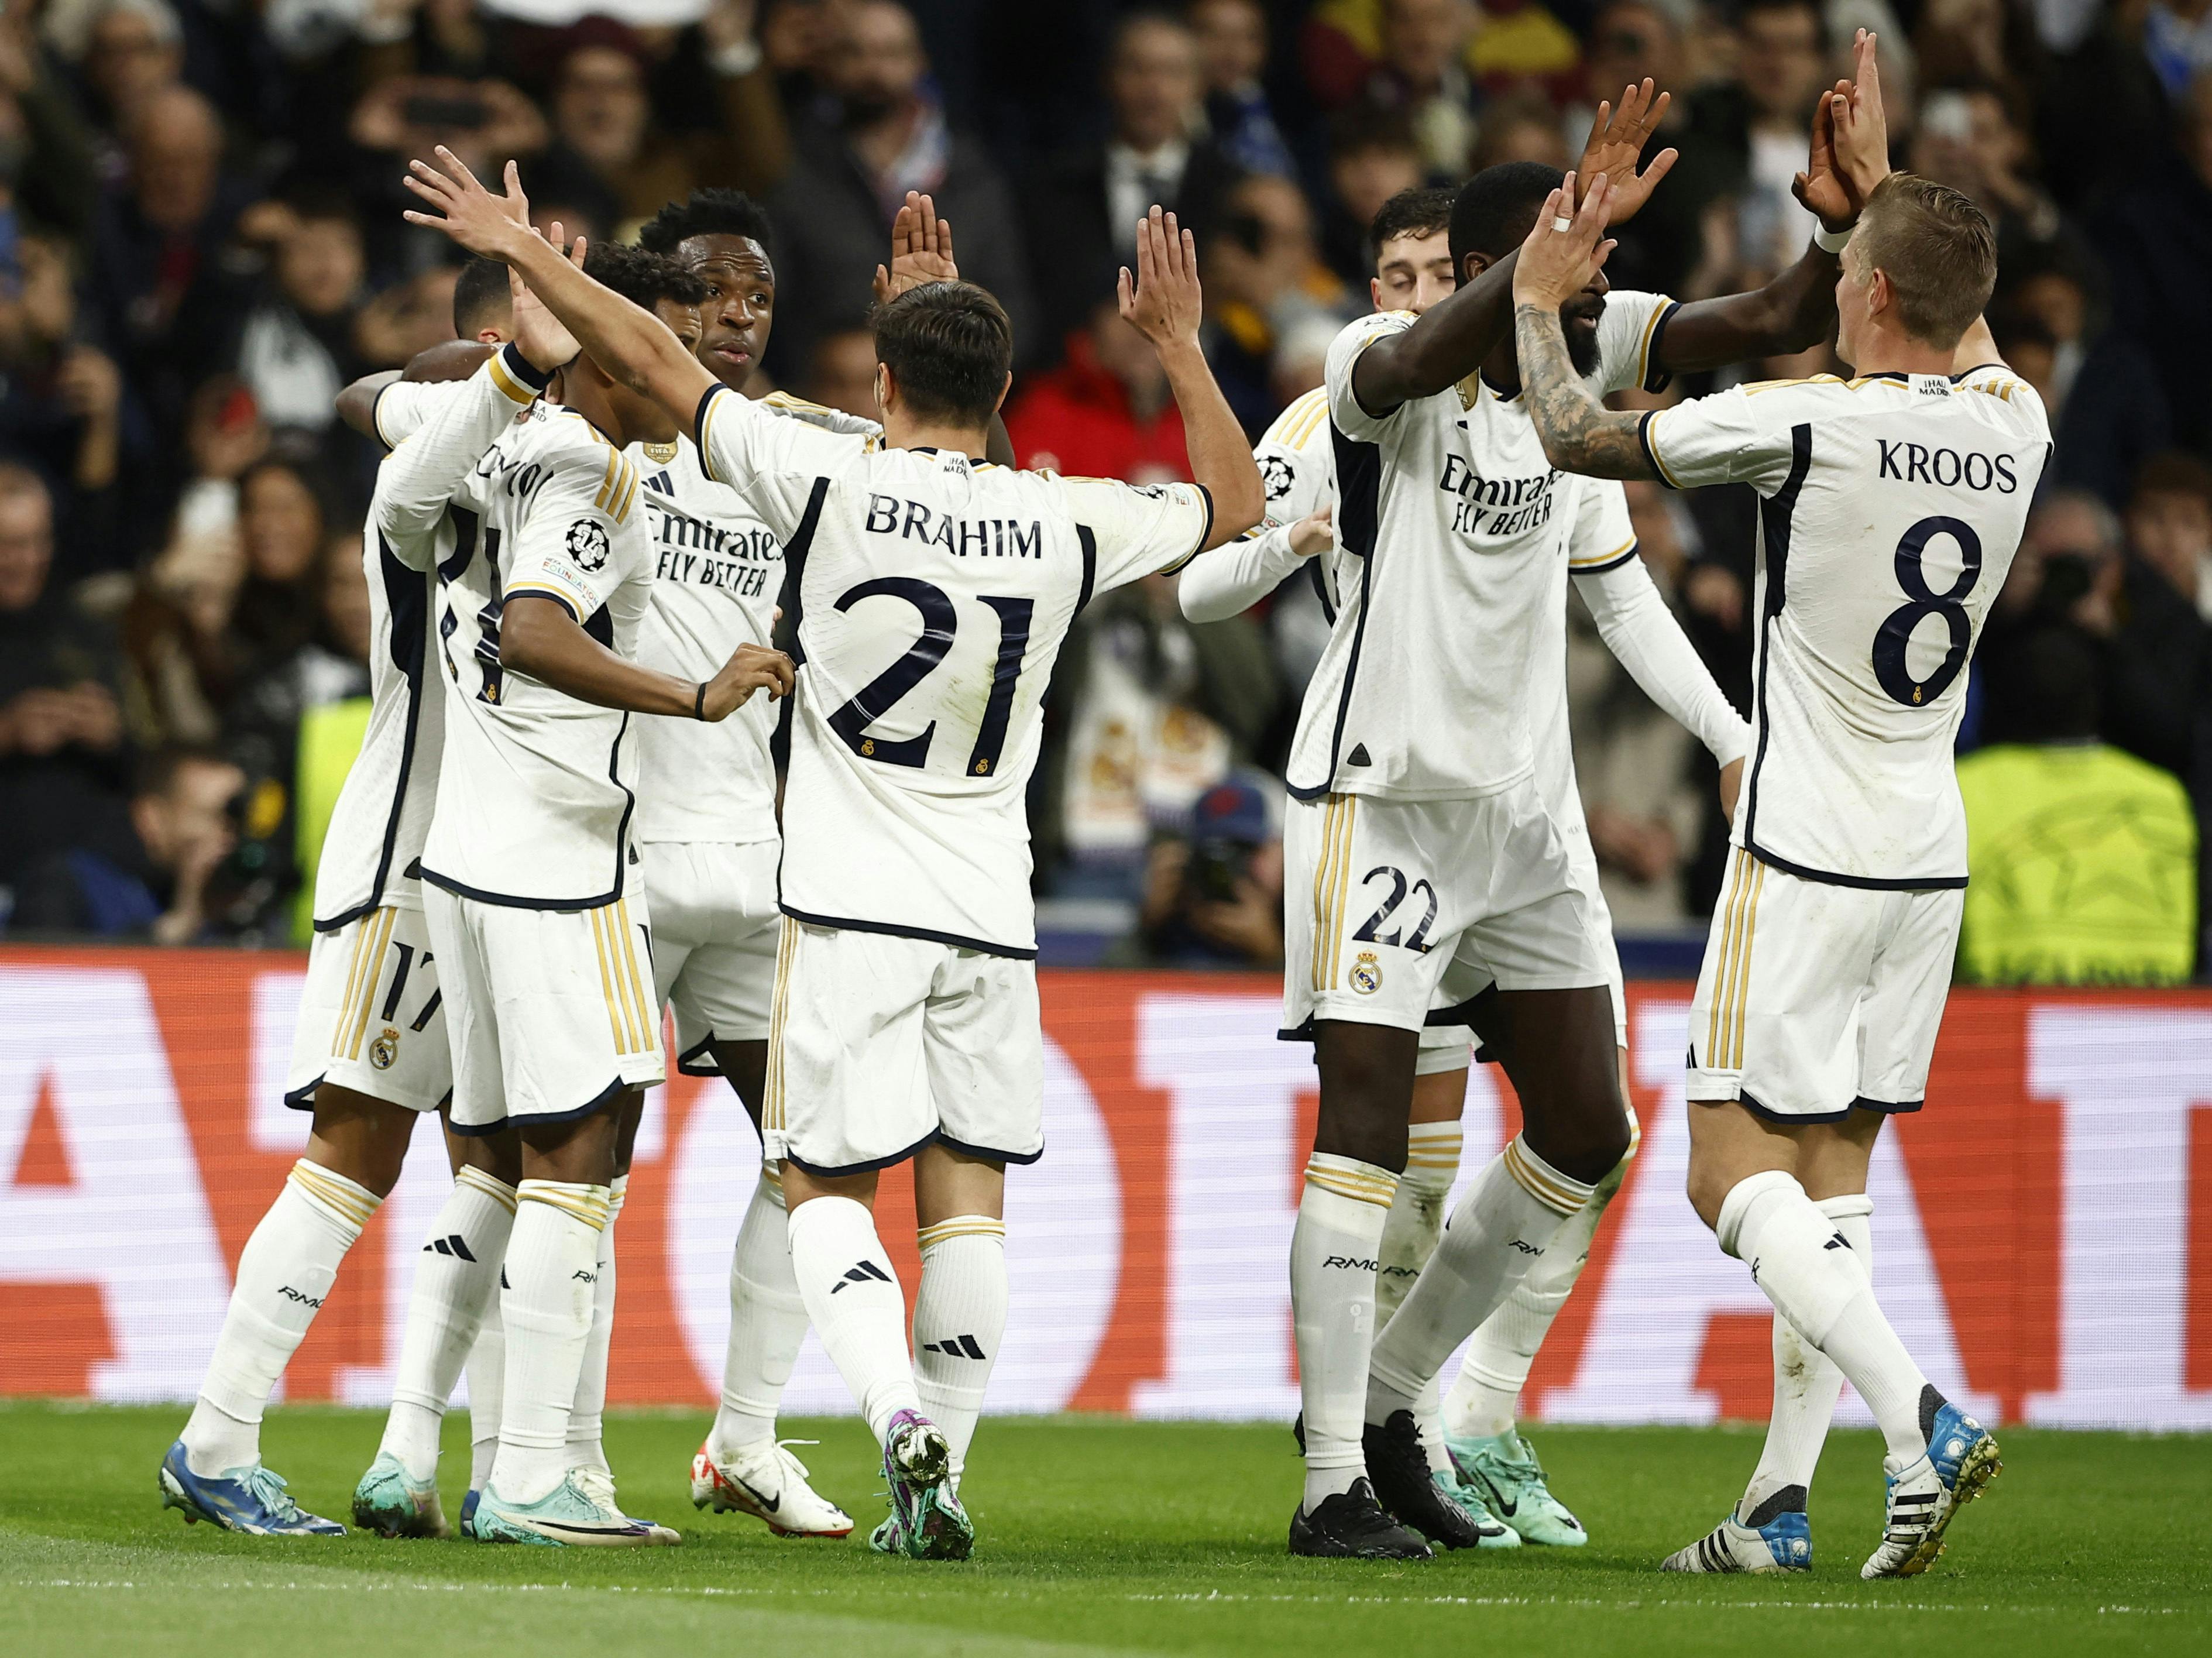 Soccer-Real Madrid beat Braga 3-0 to clinch Champions League last